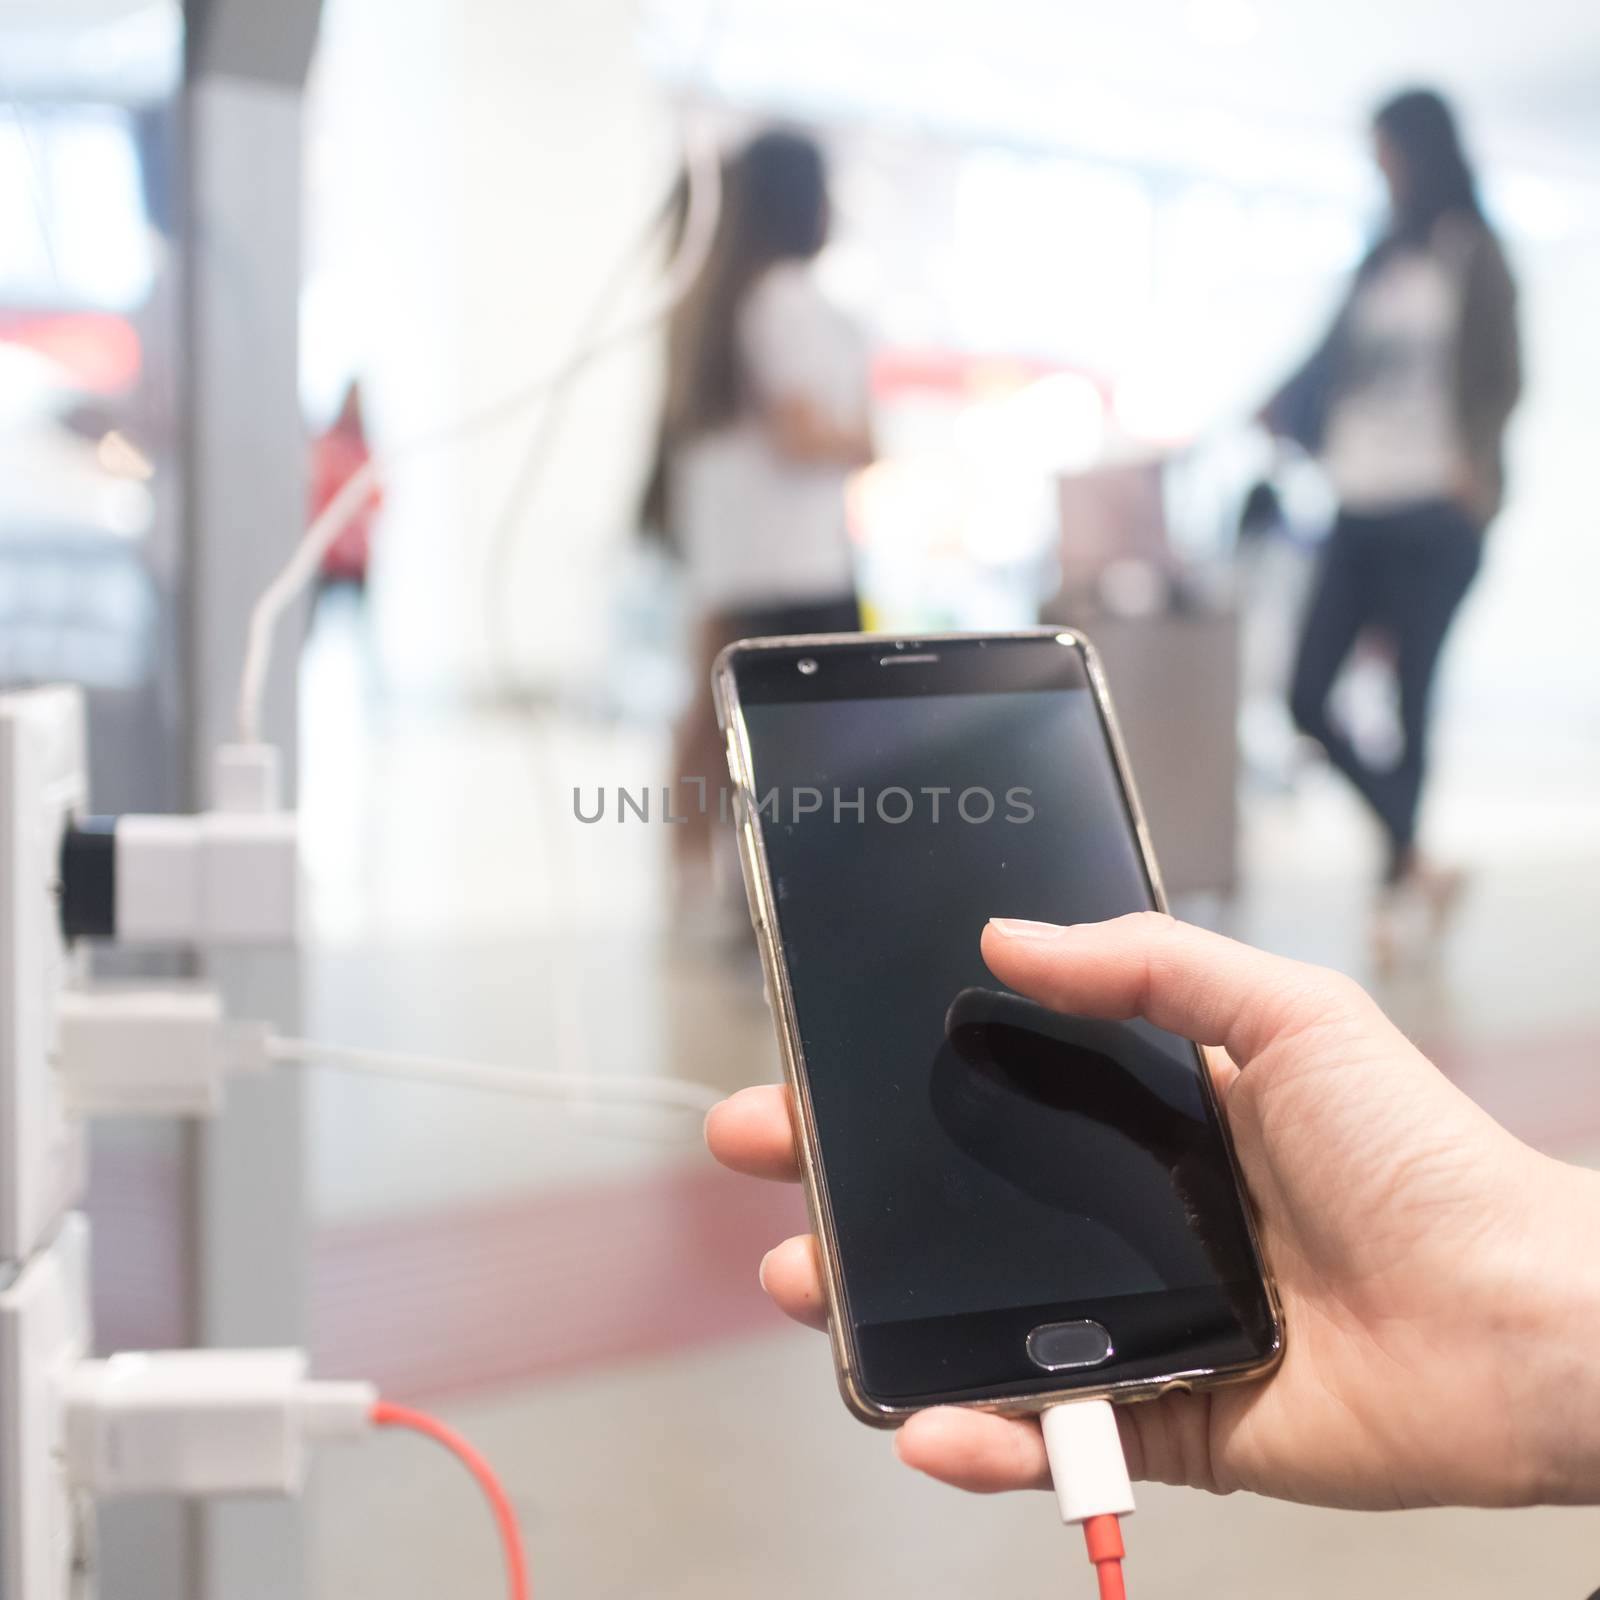 Female hands holding and using smartphone while charging it in a public place using electric plug and a charging cable by kasto